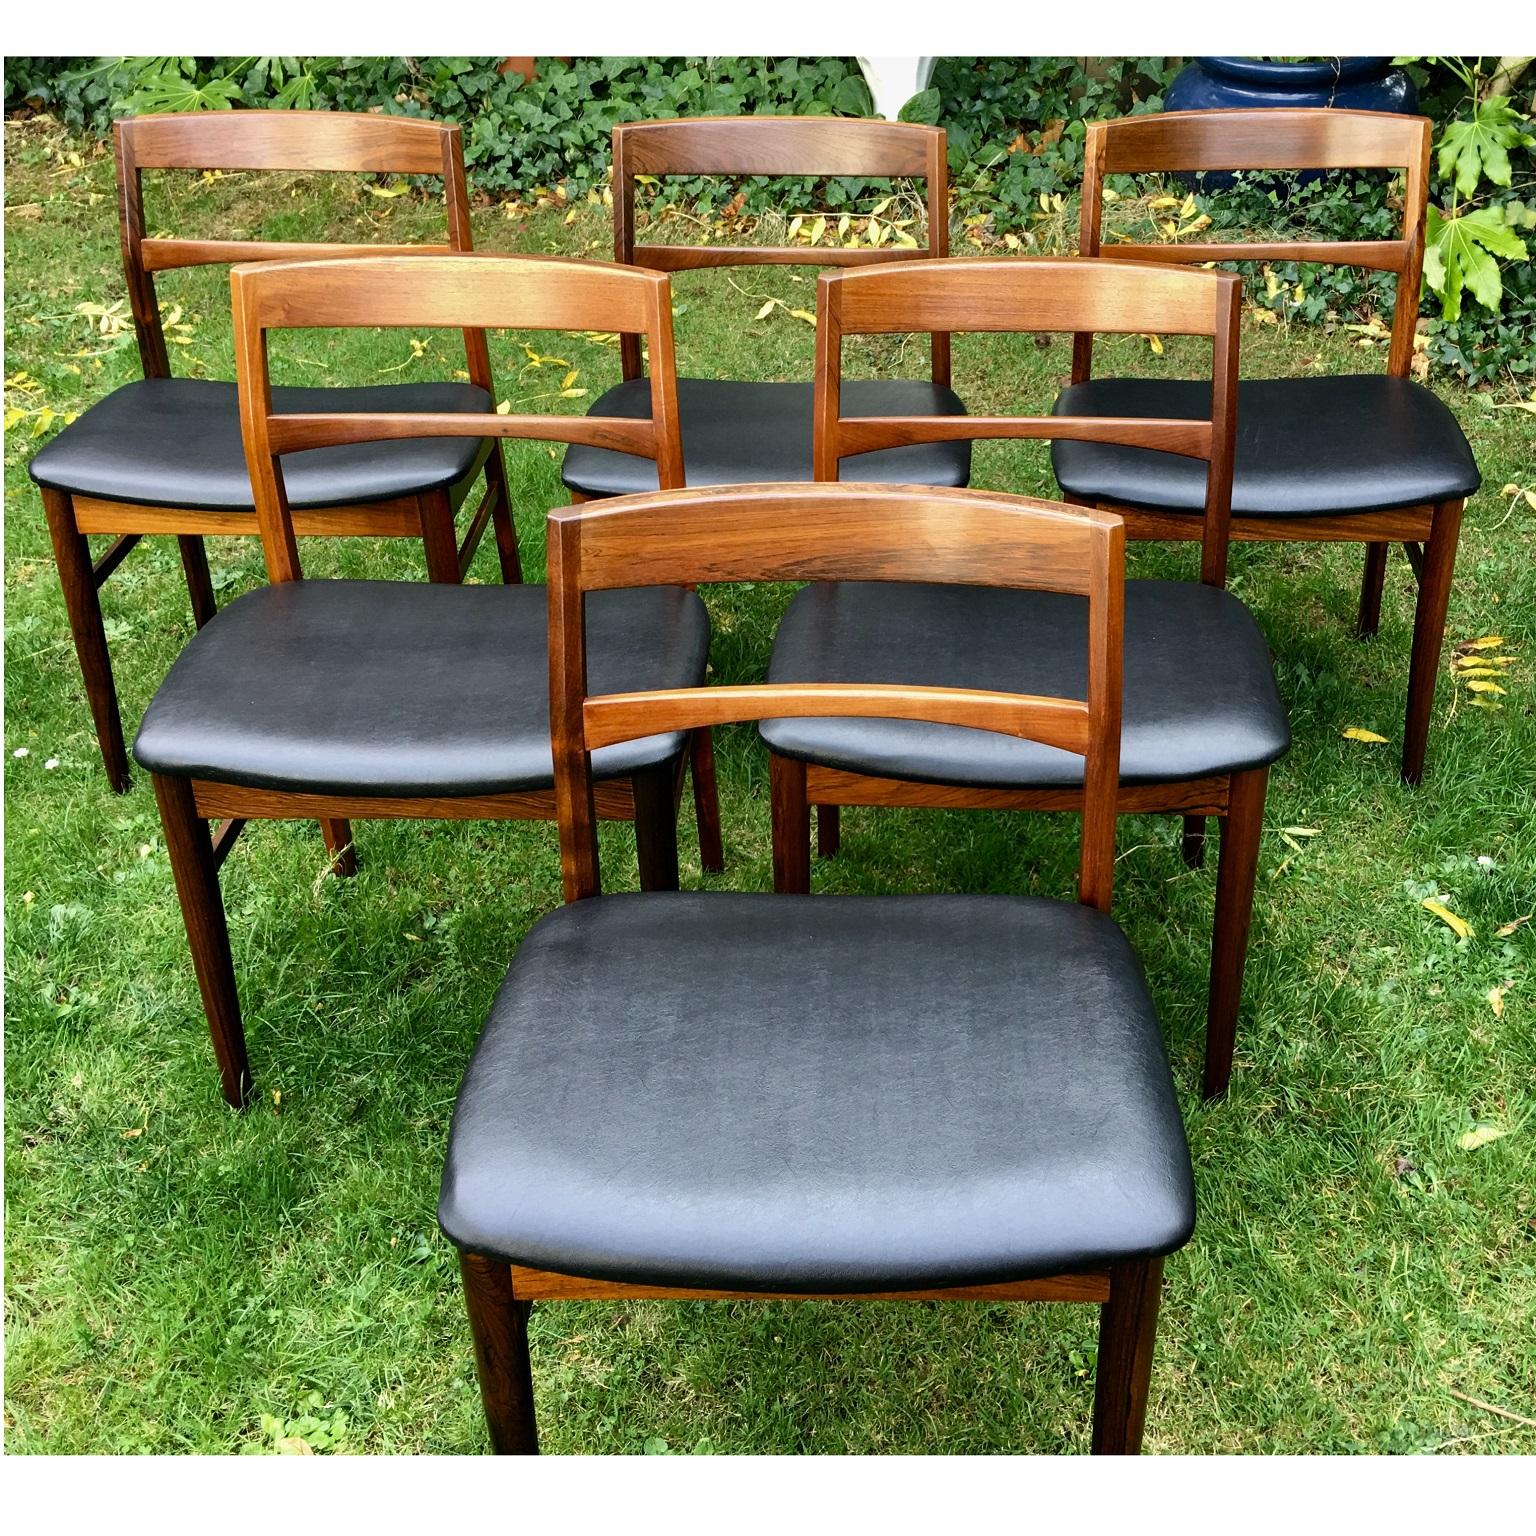 Set of 6 midcentury Danish dining chairs in rosewood by Henning Kjaernulf for Vejle Stole

Stunning set of 6 dining chairs designed by Henning Kjaernulf and manufactured by Vejle Stole- og Møbelfabrik (V S&M) in Denmark in the 1960s. The solid